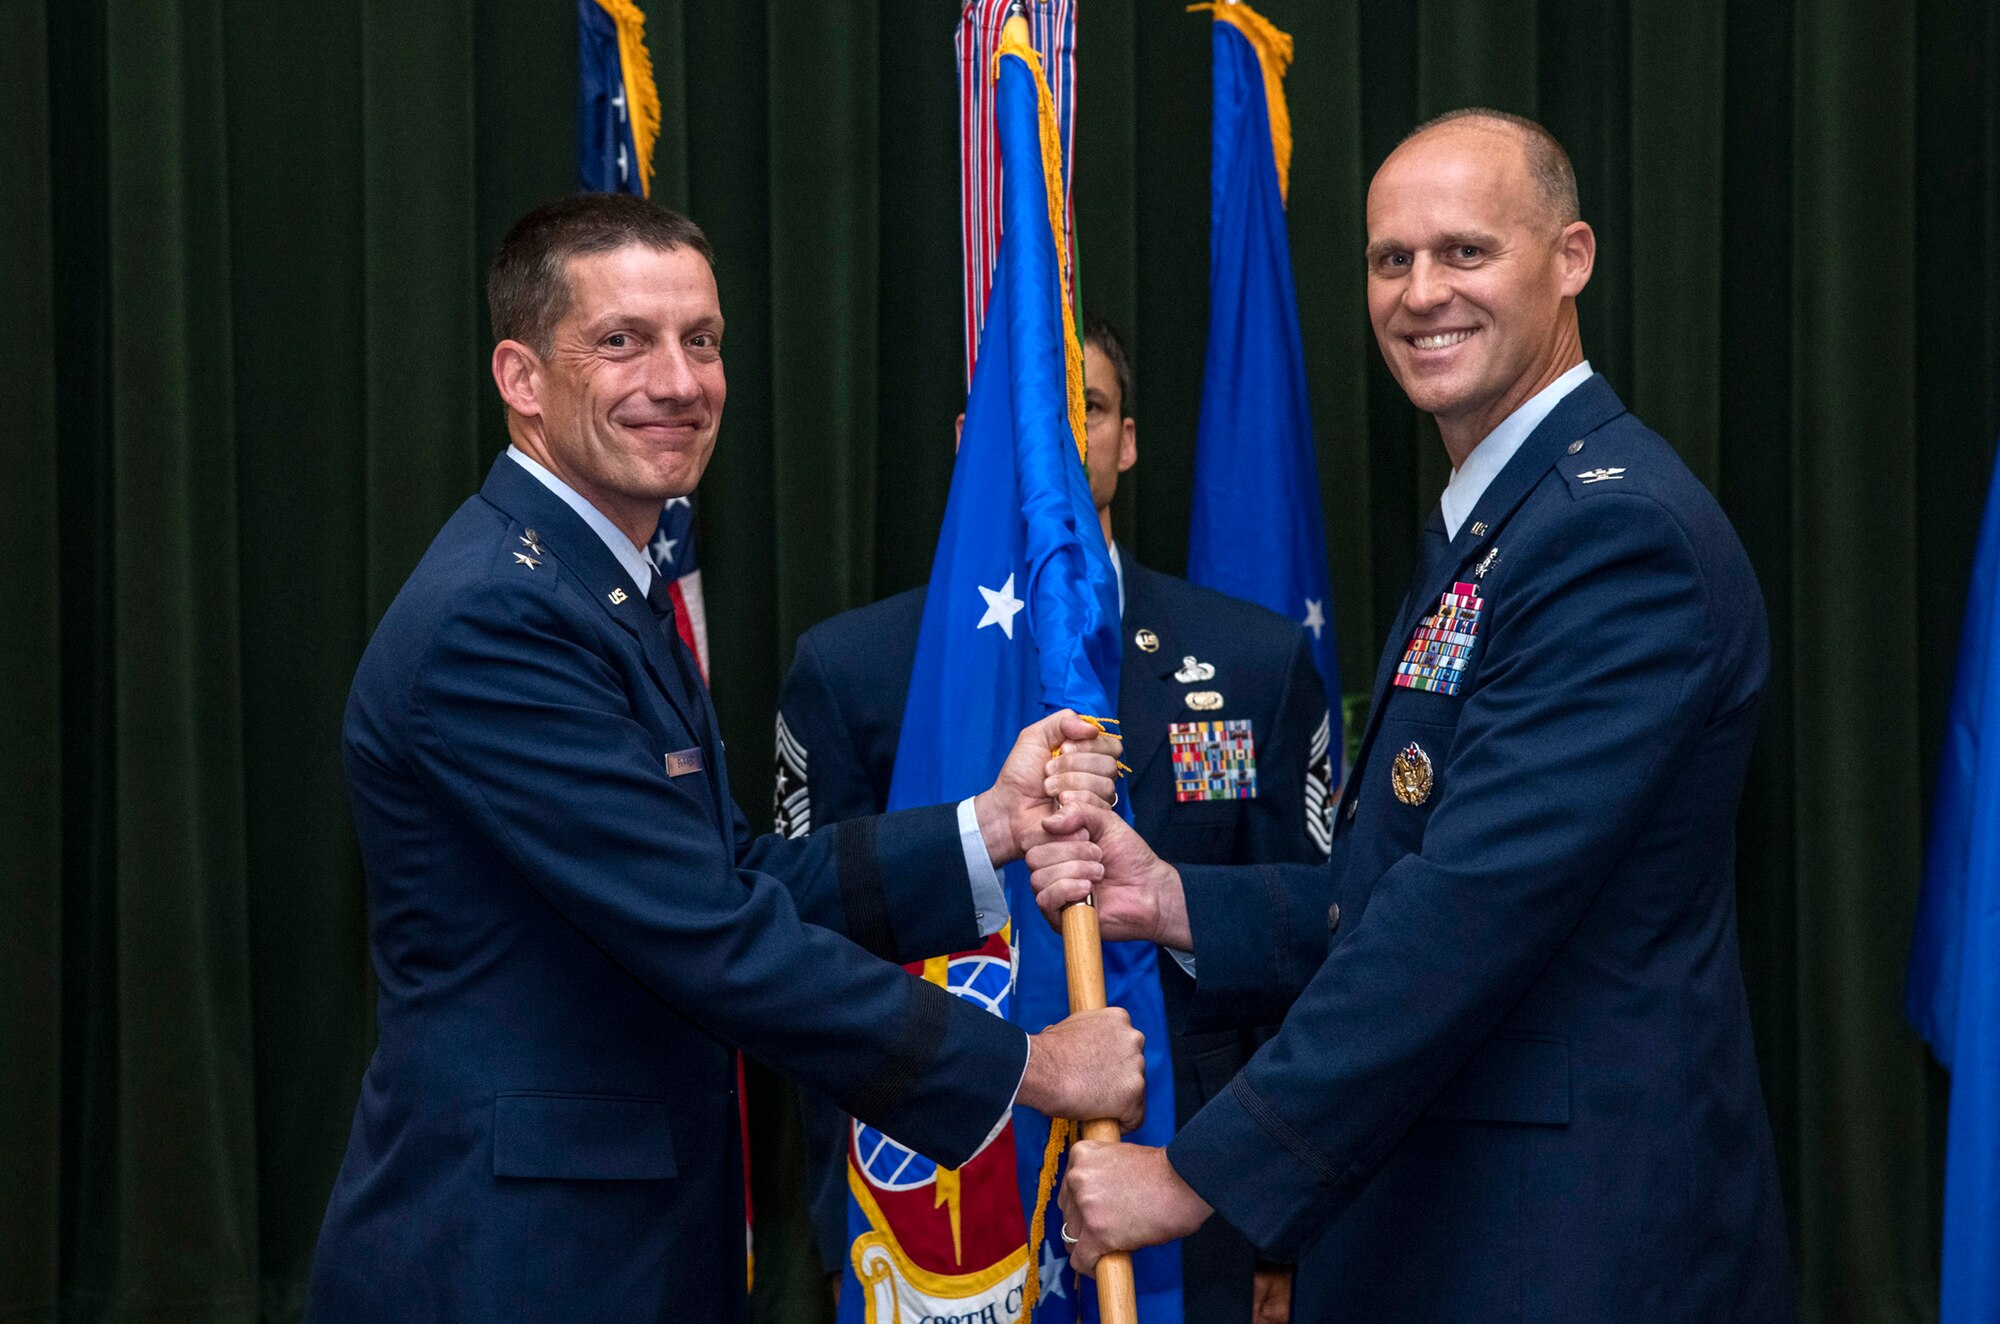 Col. Steven Anderson (right) accepts command of the 688th Cyberspace Wing from Maj. Gen. Robert Skinner, 24th Air Force commander, during the wing’s change of command ceremony at Joint Base San Antonio-Lackland, Texas, on June 25, 2019. Col. Eric DeLange relinquished command of the 688th CW during the ceremony. (U.S. Air Force photo by Johnny Saldivar)